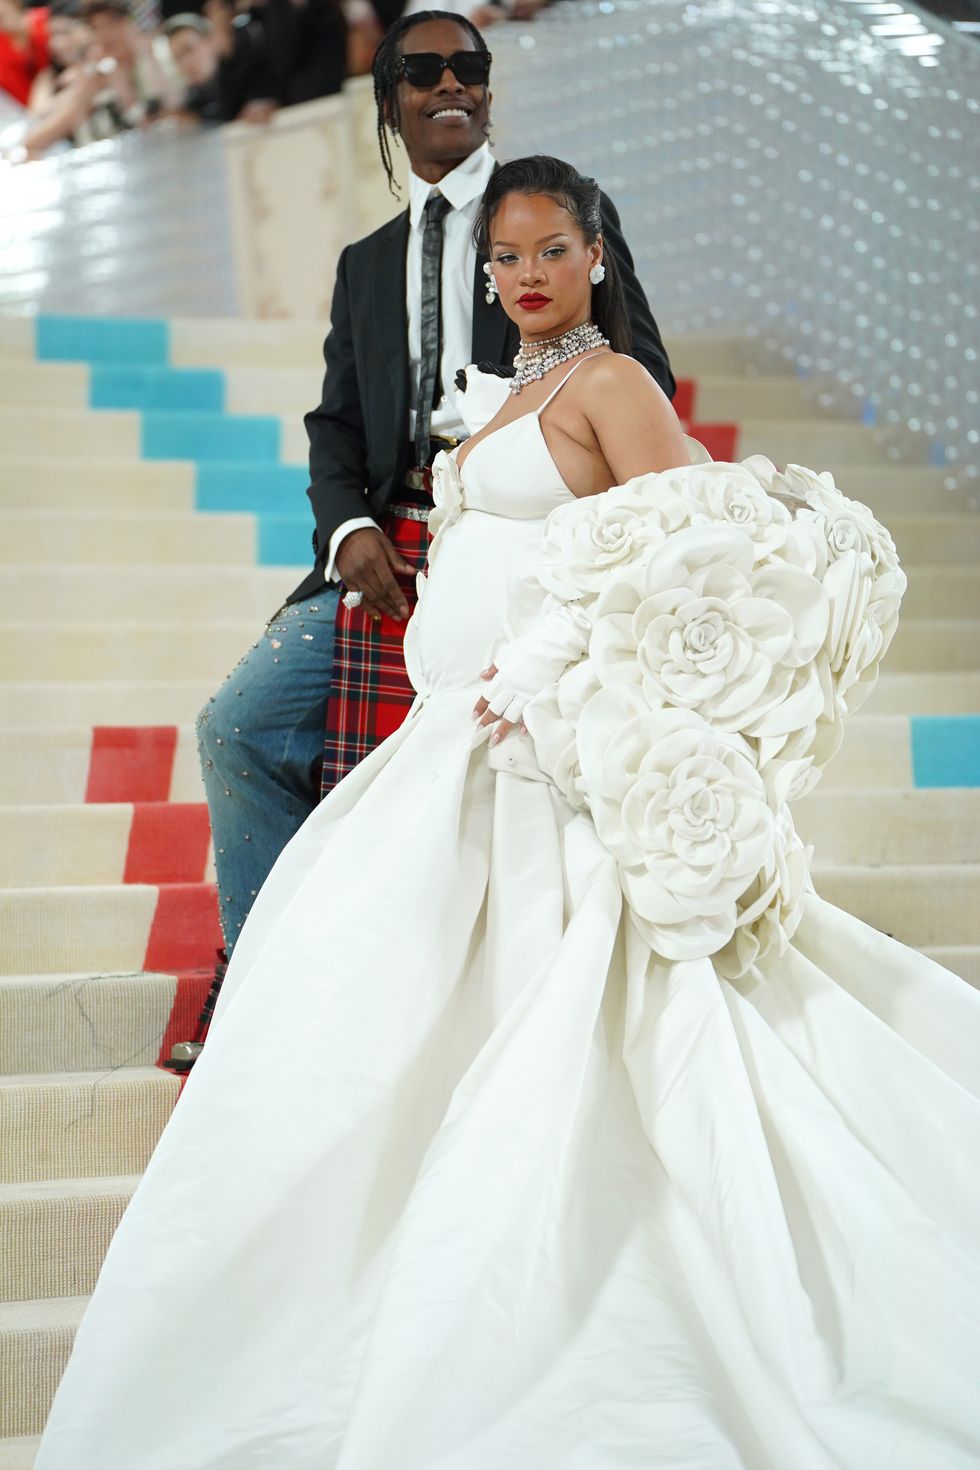 Rihanna, A$AP Rocky 'marry' in music video: See photos of the couple